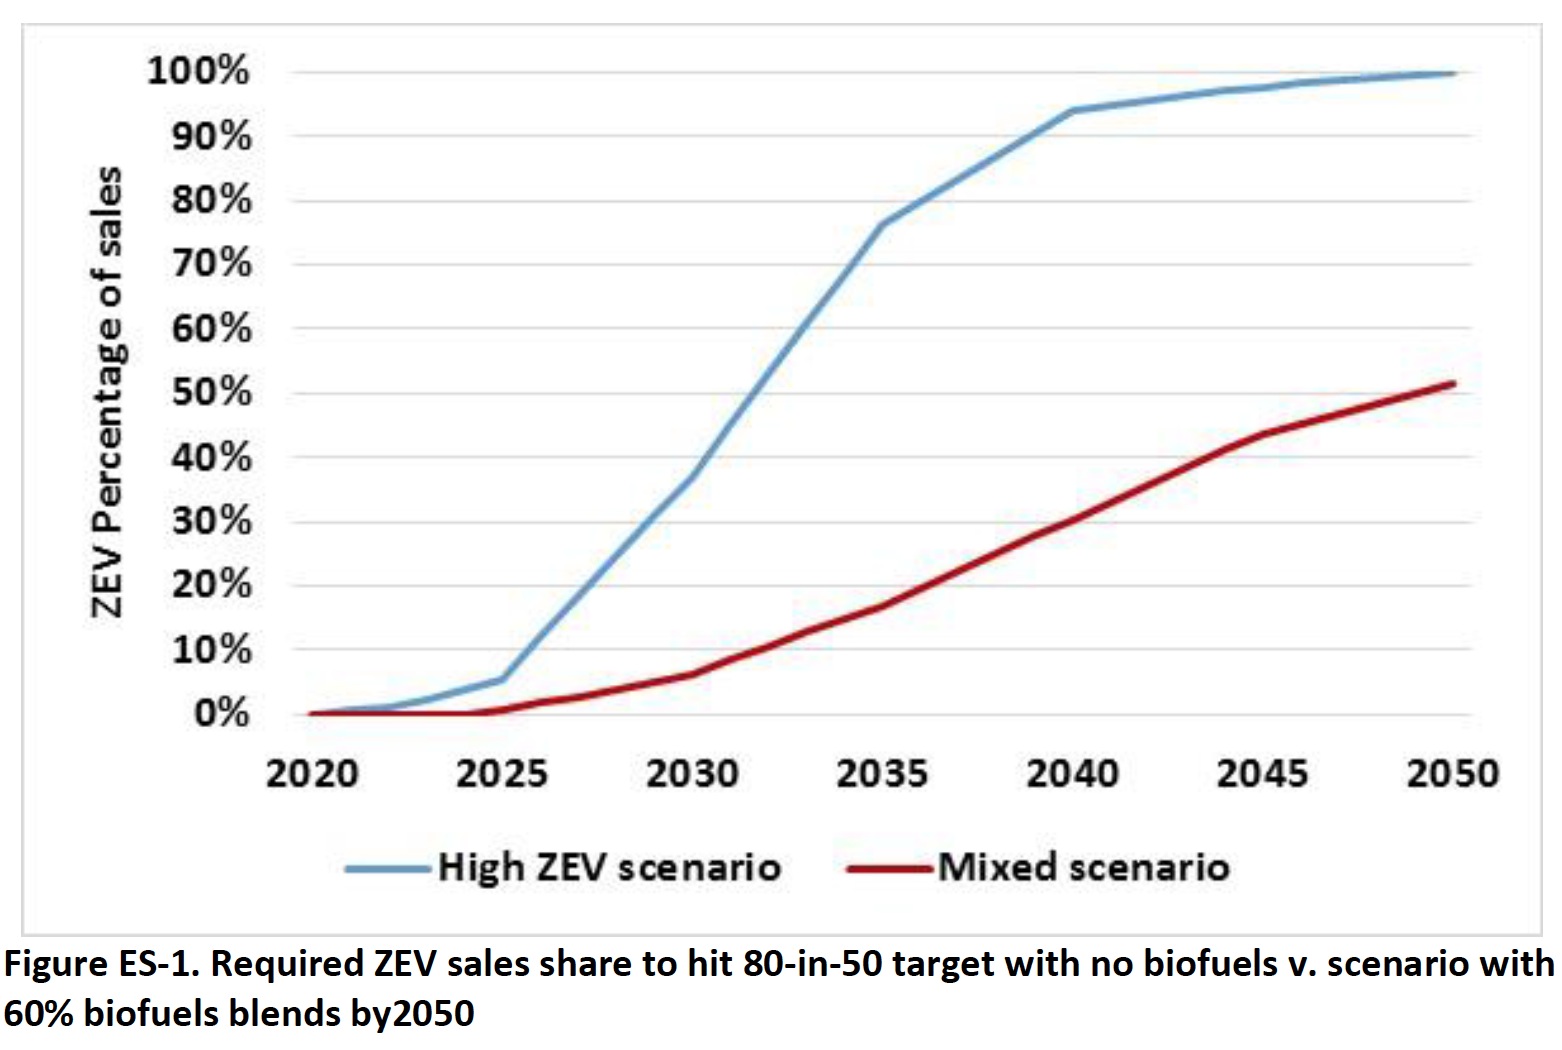 Figure ES-1. Required ZEV sales share to hit 80-in-50 target with no biofuels v. scenario with 60% biofuels blends by2050